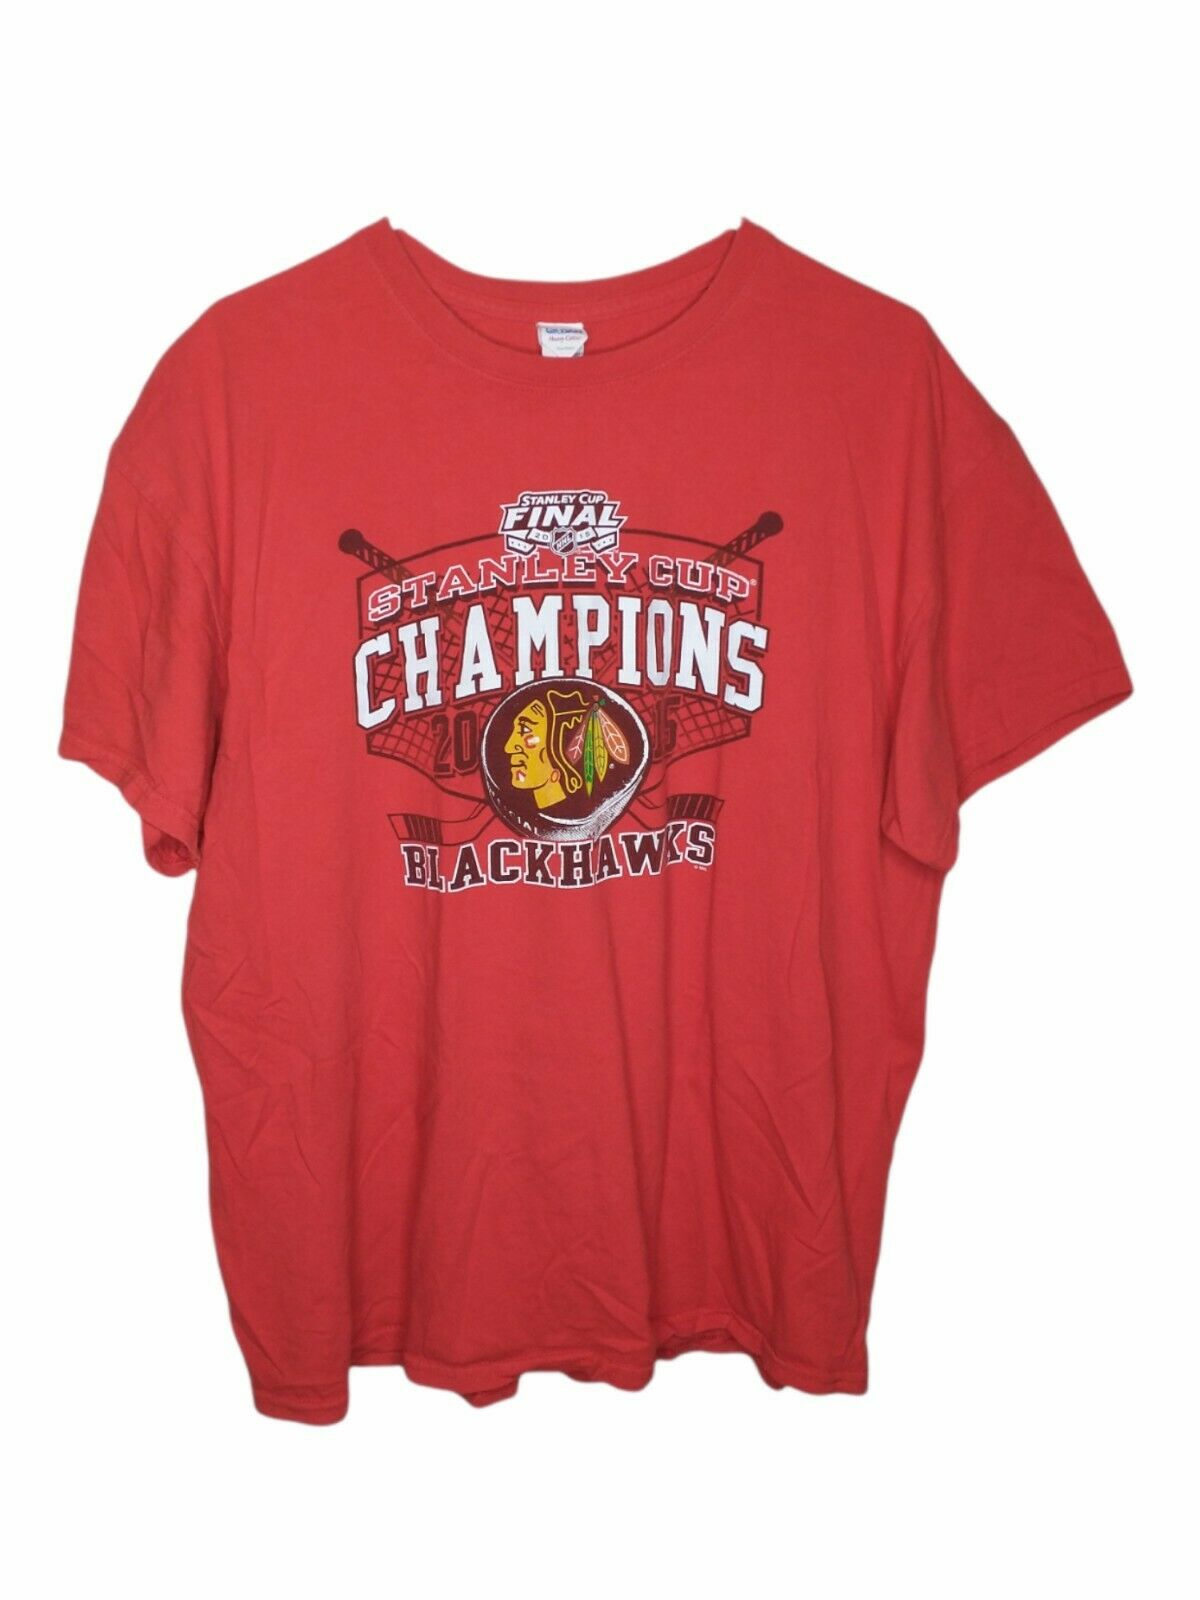 2015 Blackhawks NHL Stanley Cup Champions Men's Red T-Shirt Size XL measures 29" length, 21" width and 7" sleeve.